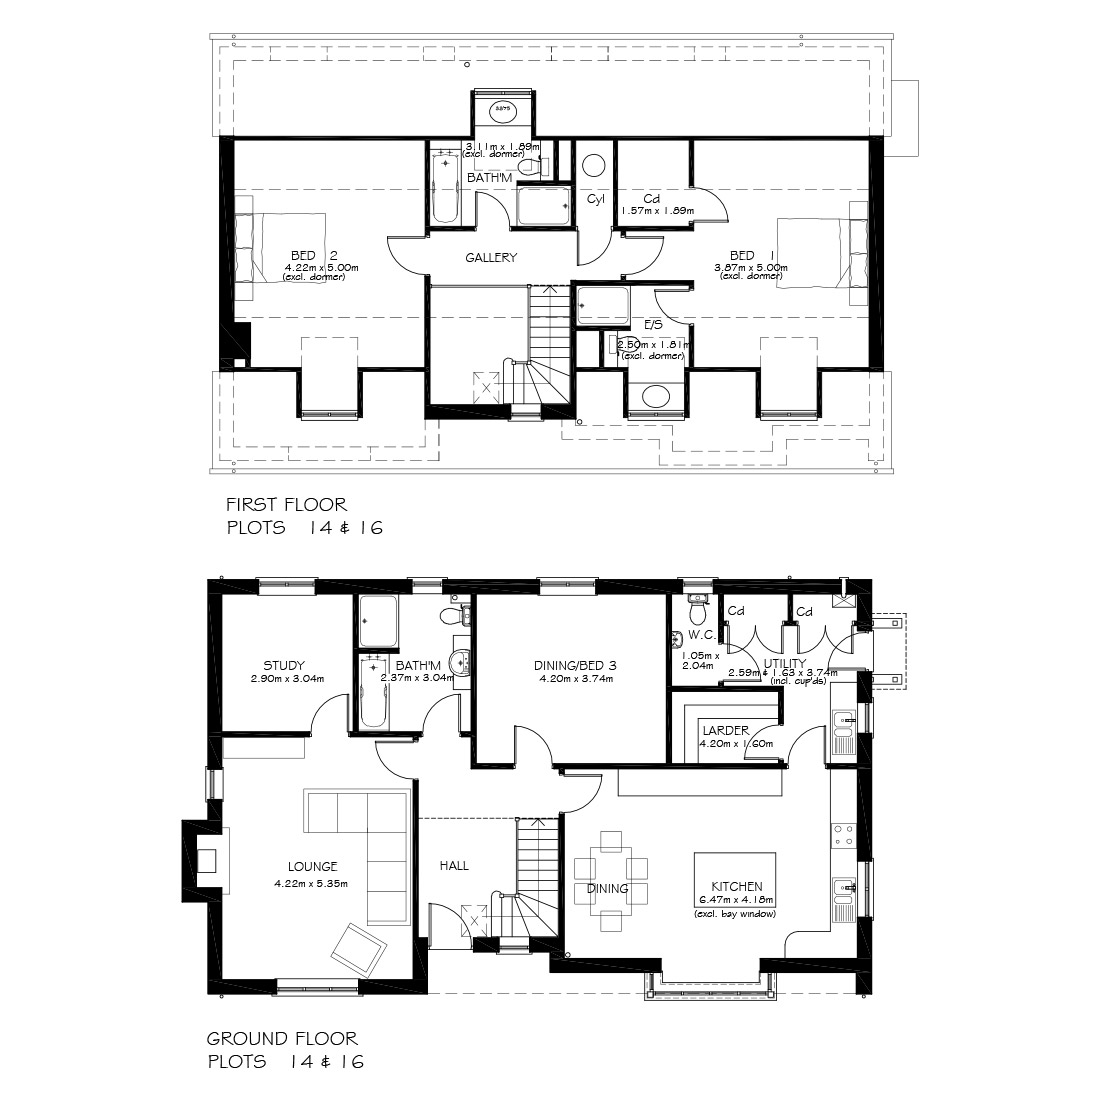 Plot 14 and 16